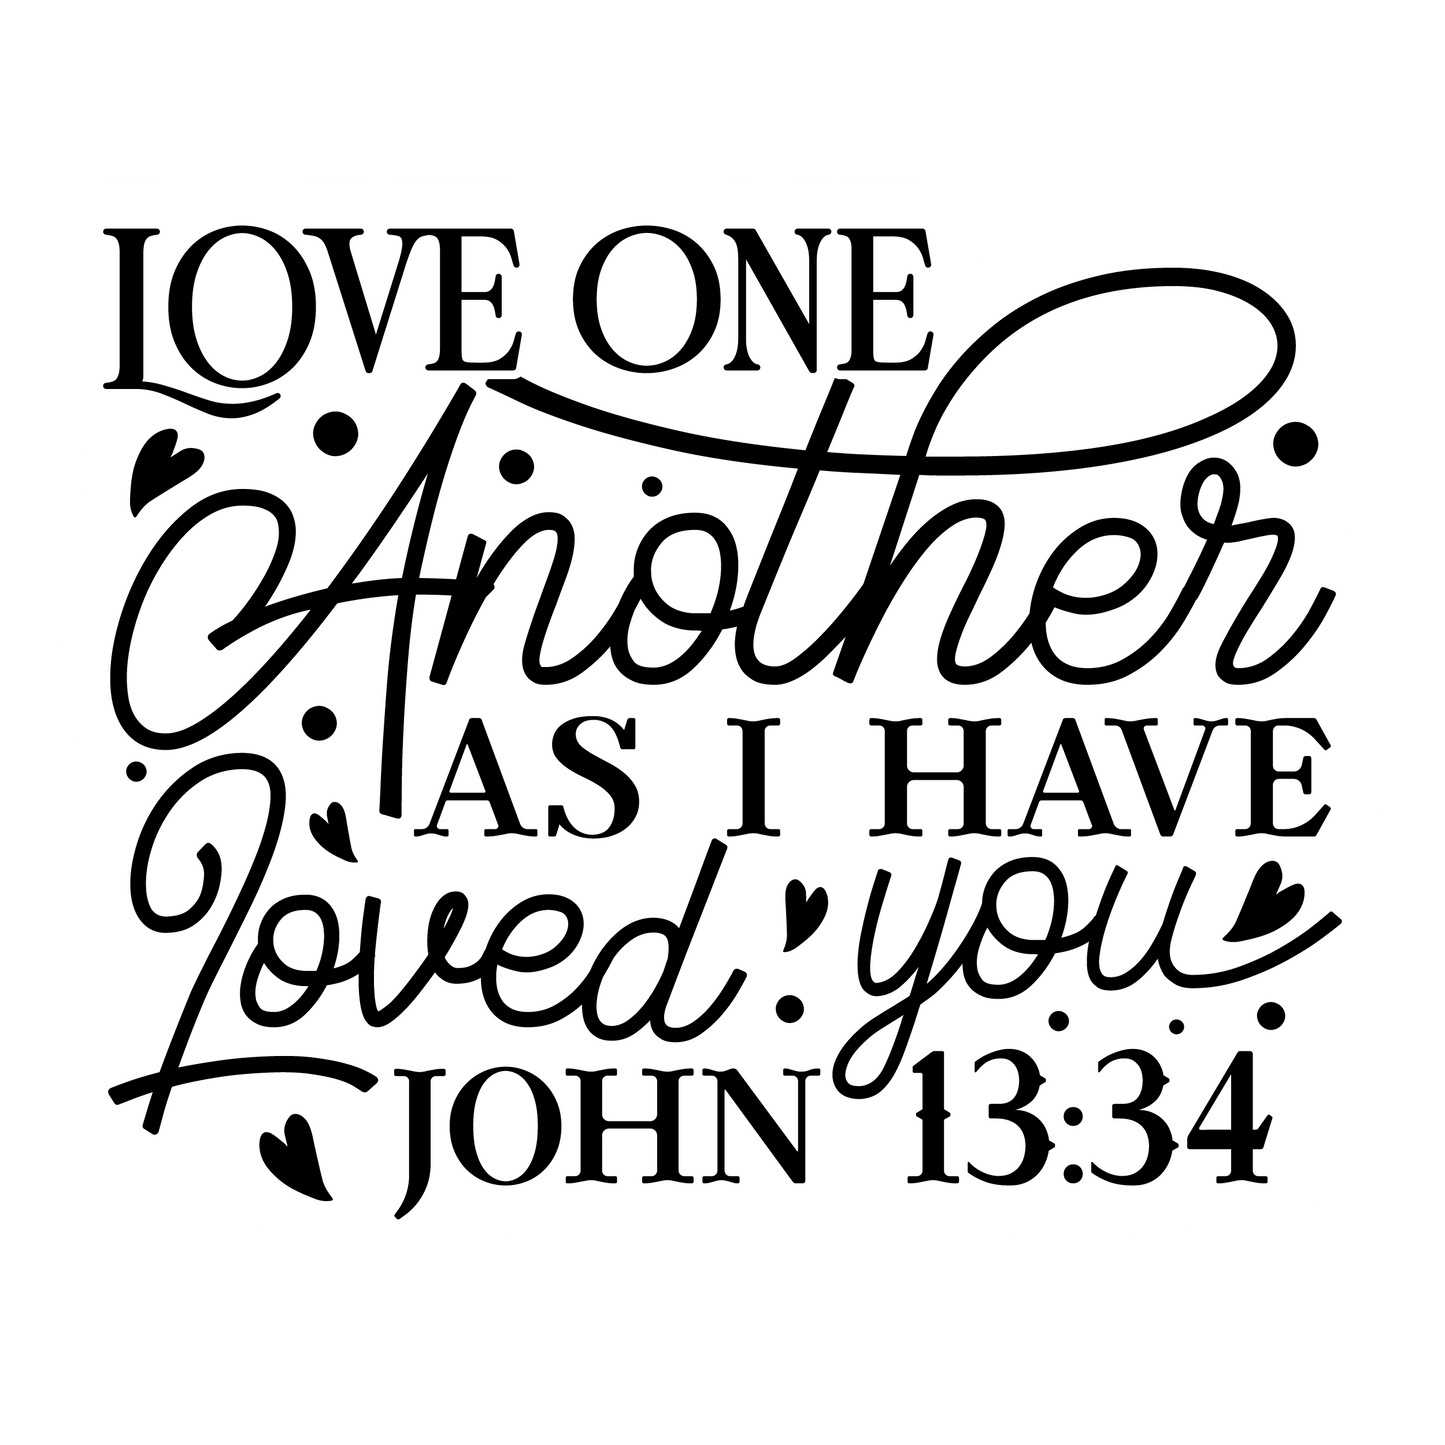 Inspirational Quote "Love One Another As I Have Loved You John 13:34" Motivational Sticker Vinyl Decal Motivation Stickers- 5" Vinyl Sticker Waterproof